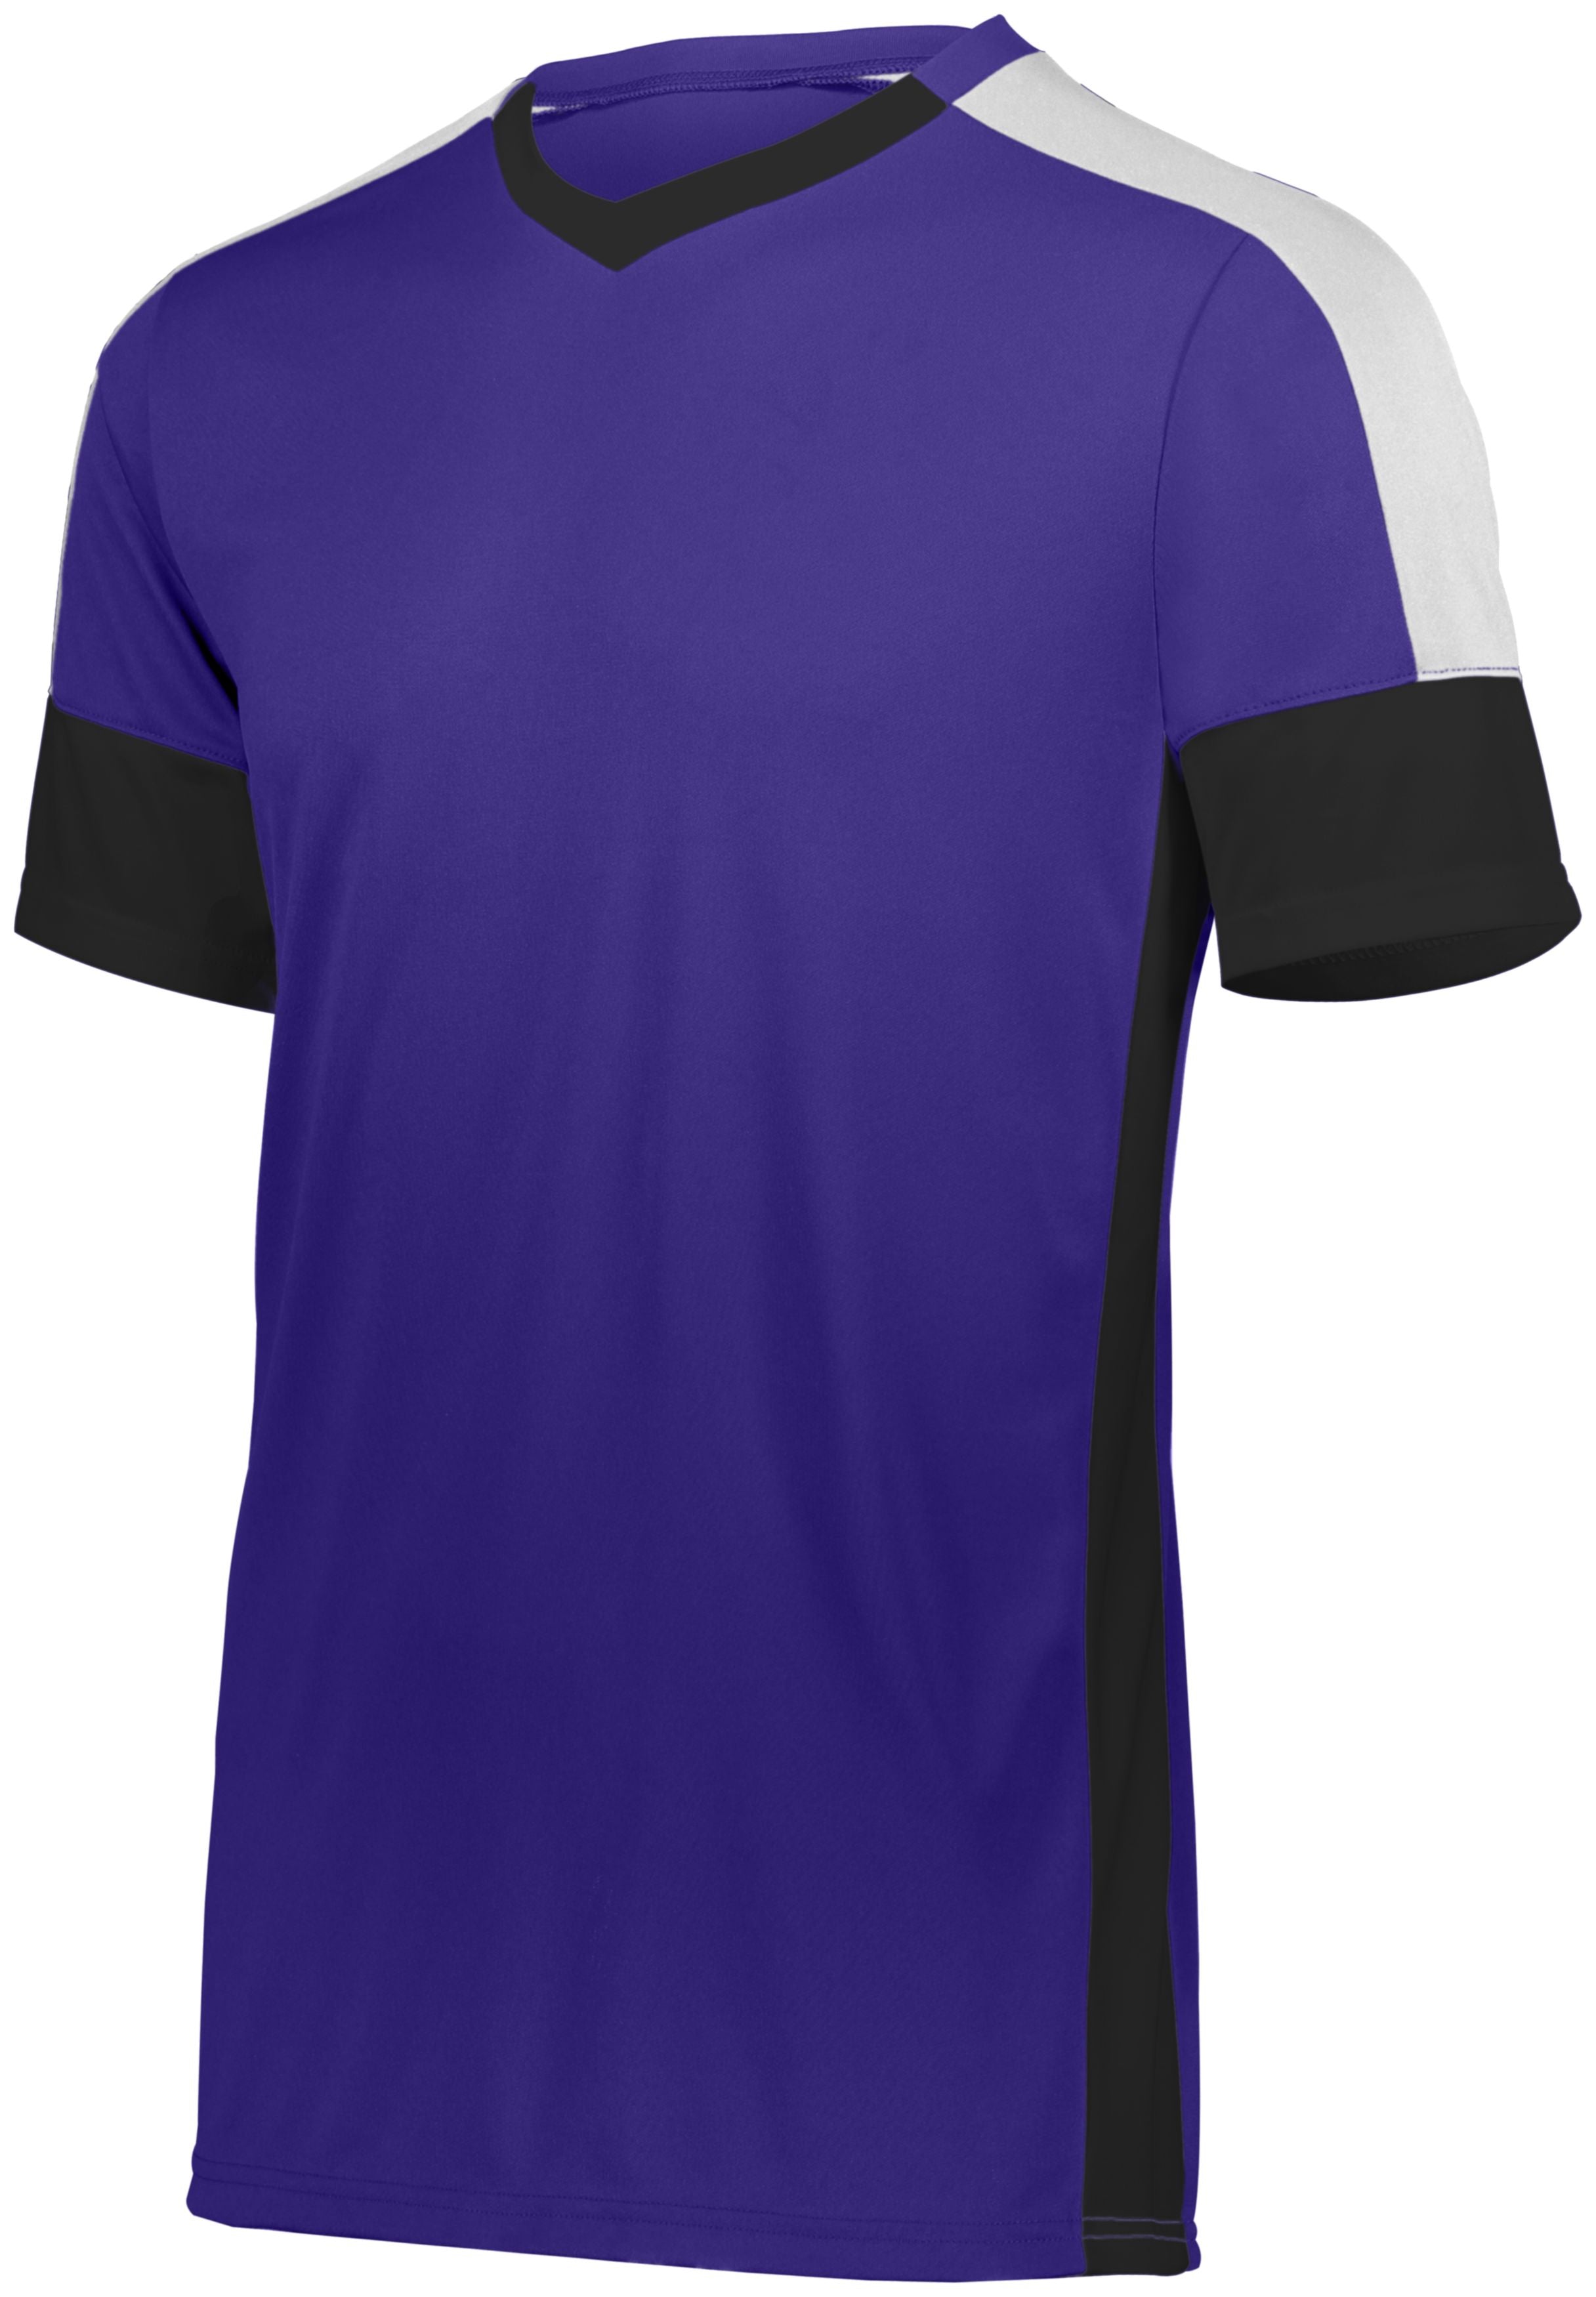 High 5 Youth Wembley Soccer Jersey in Purple/Black/White  -Part of the Youth, Youth-Jersey, High5-Products, Soccer, Shirts, All-Sports-1 product lines at KanaleyCreations.com